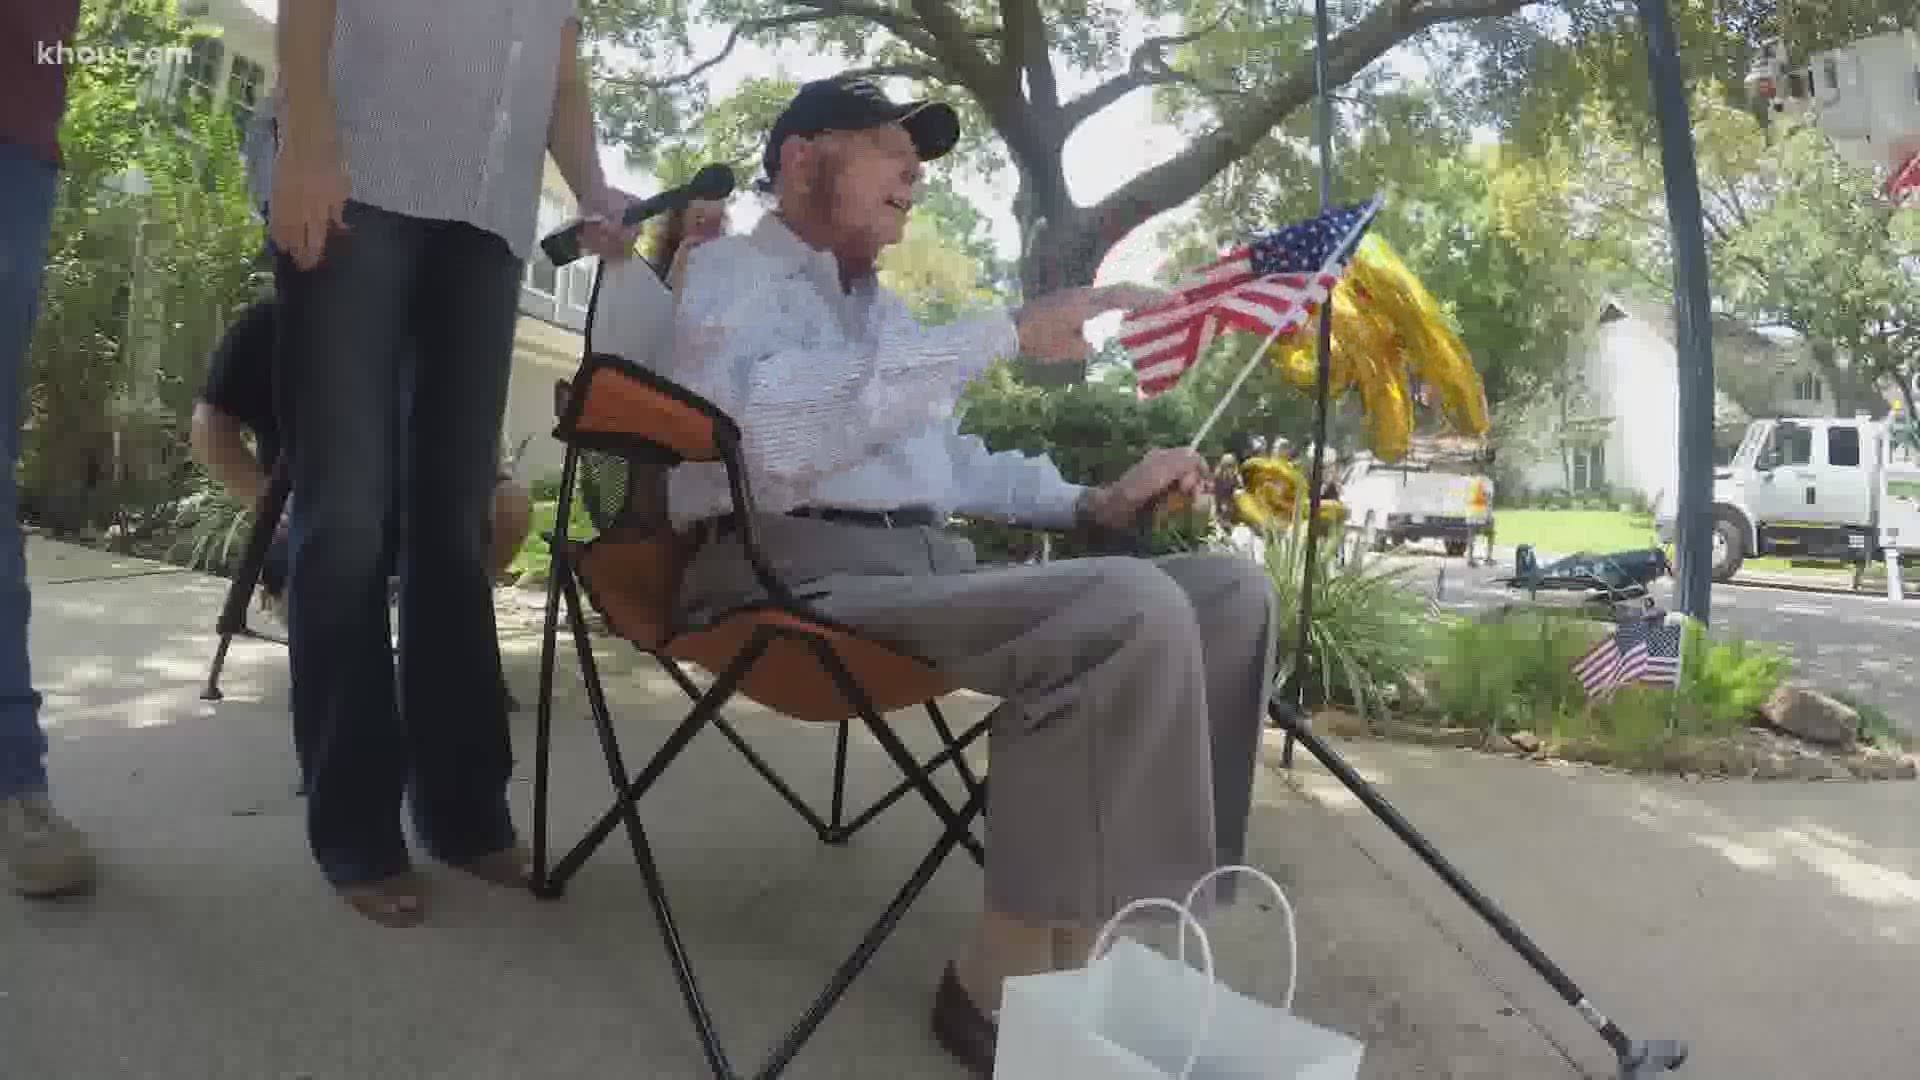 A Houston neighborhood surprised 99-year-old "Pappy" on his birthday with a car parade for the Marine.